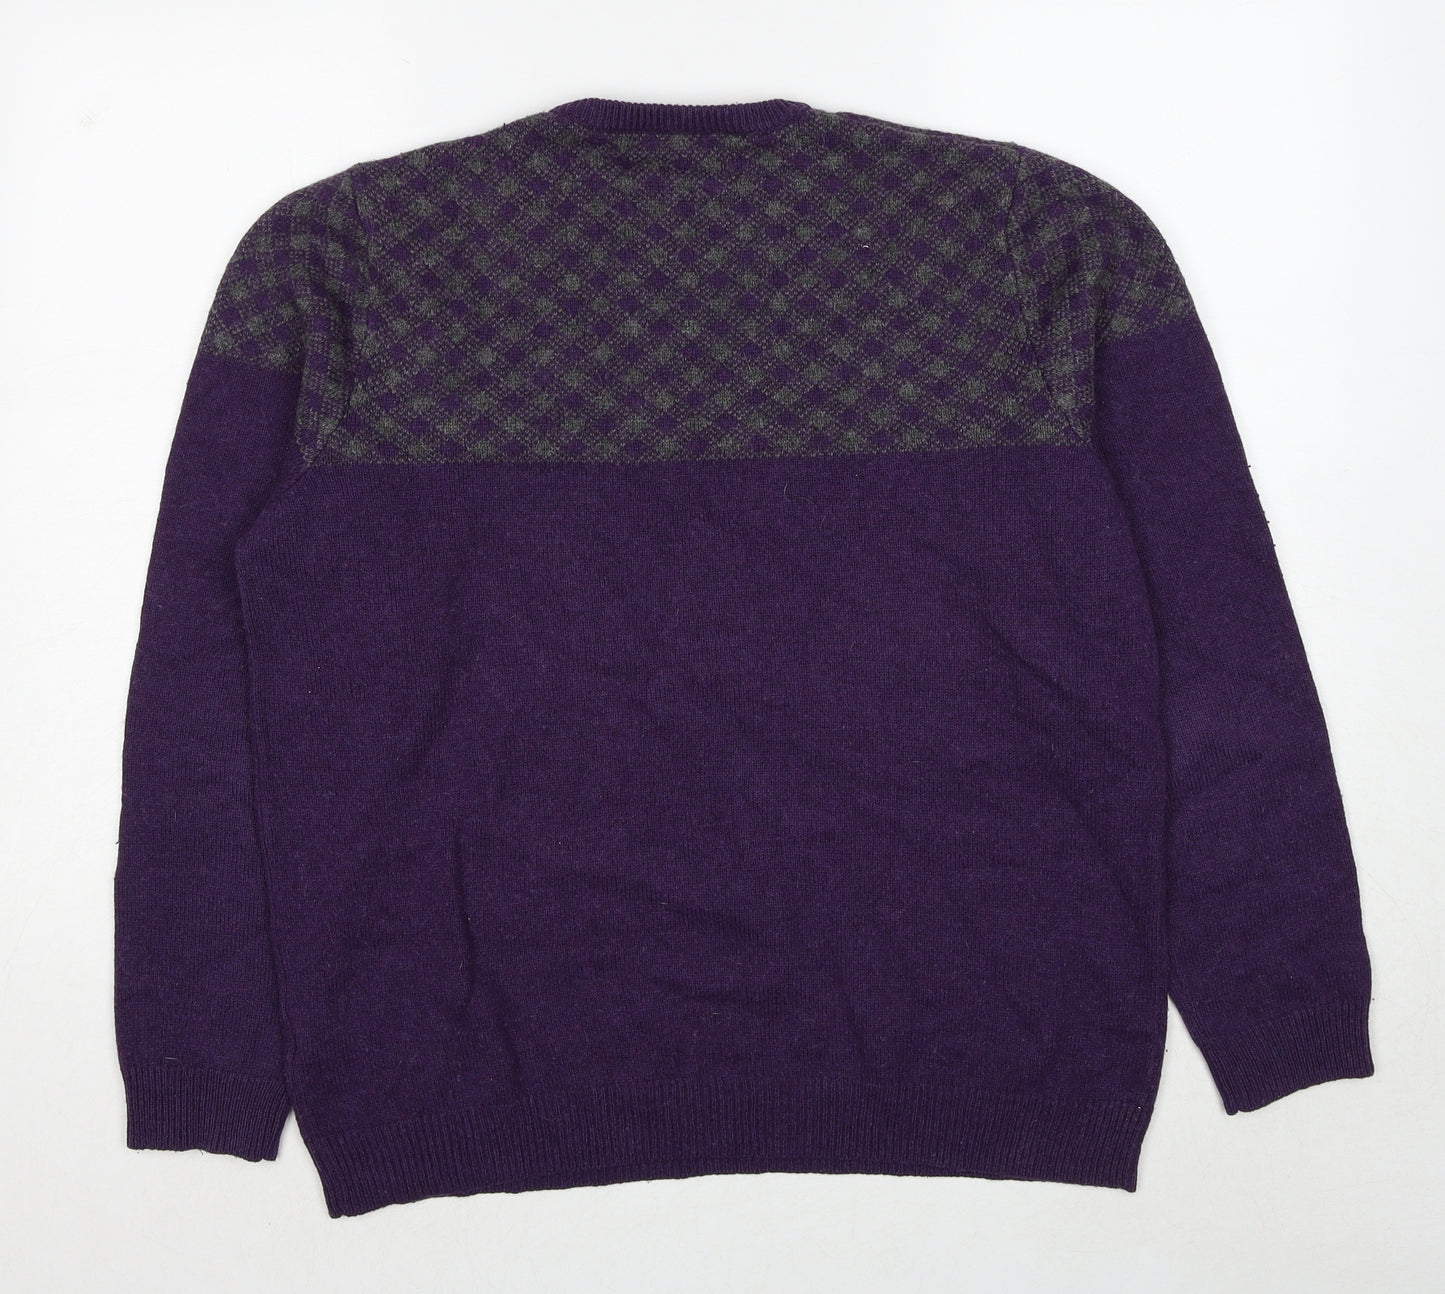 Marks and Spencer Mens Purple Round Neck Geometric Acrylic Pullover Jumper Size L Long Sleeve